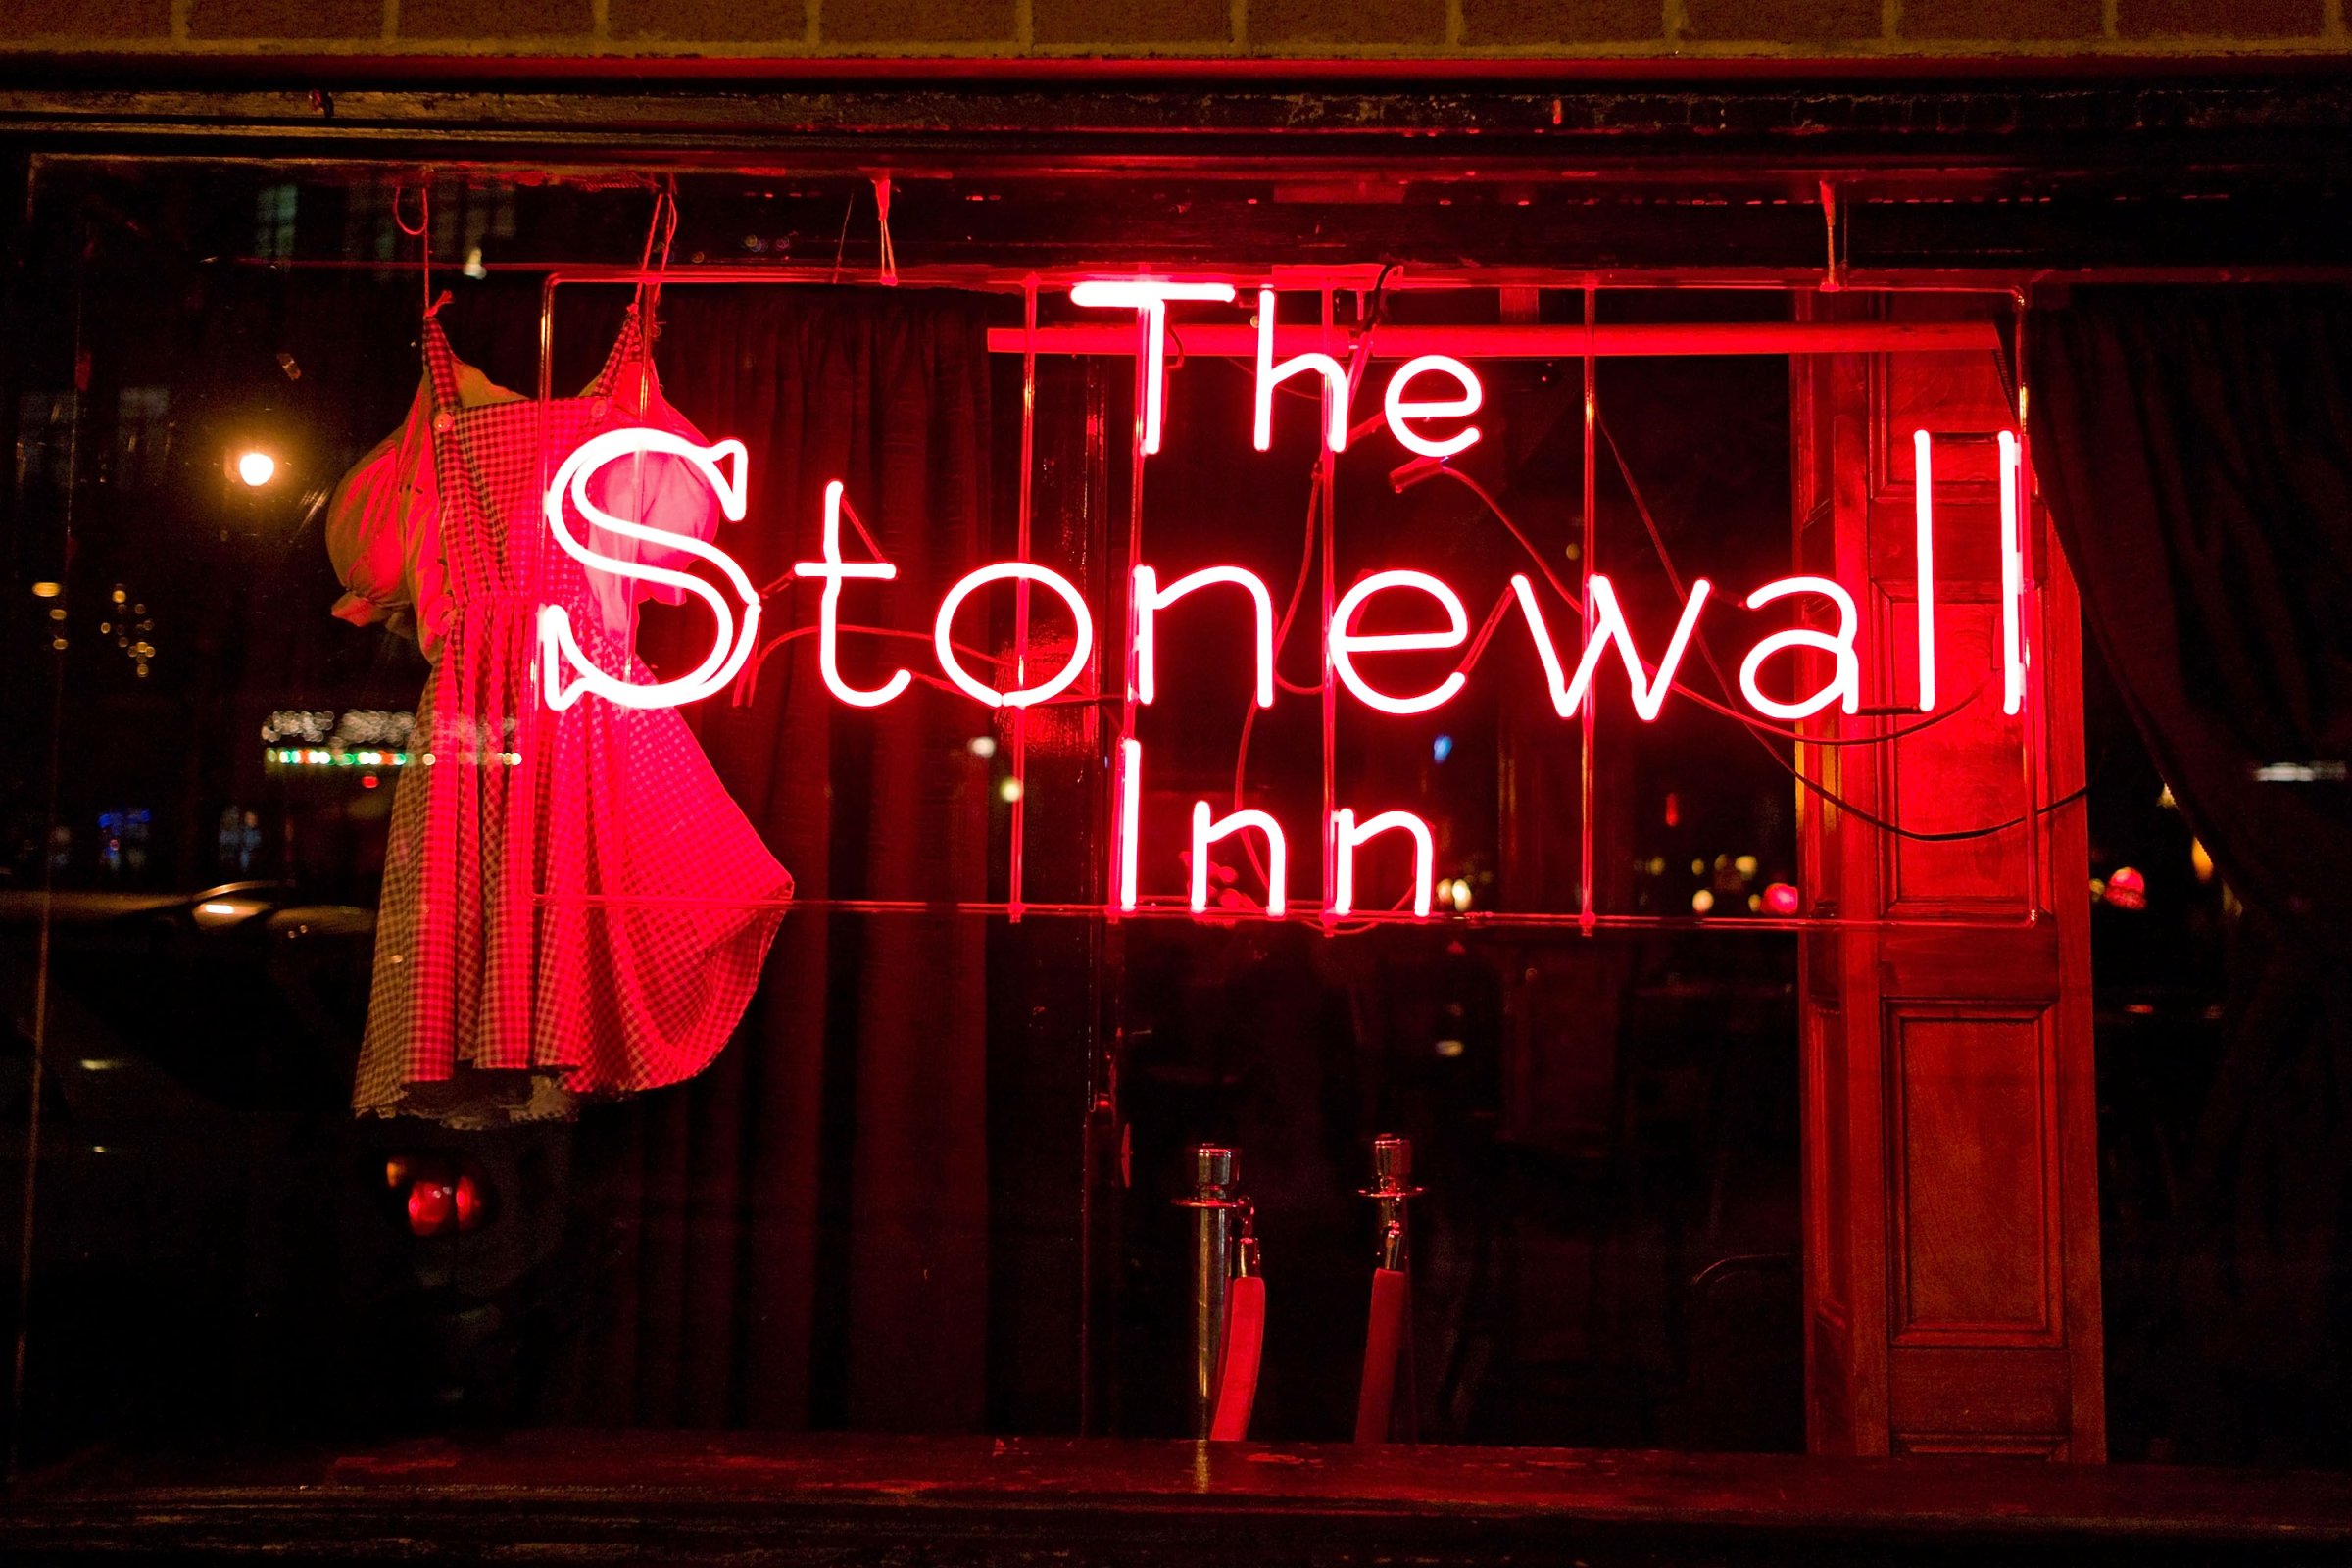 The Stonewall Inn in New York City on March 2, 2011.